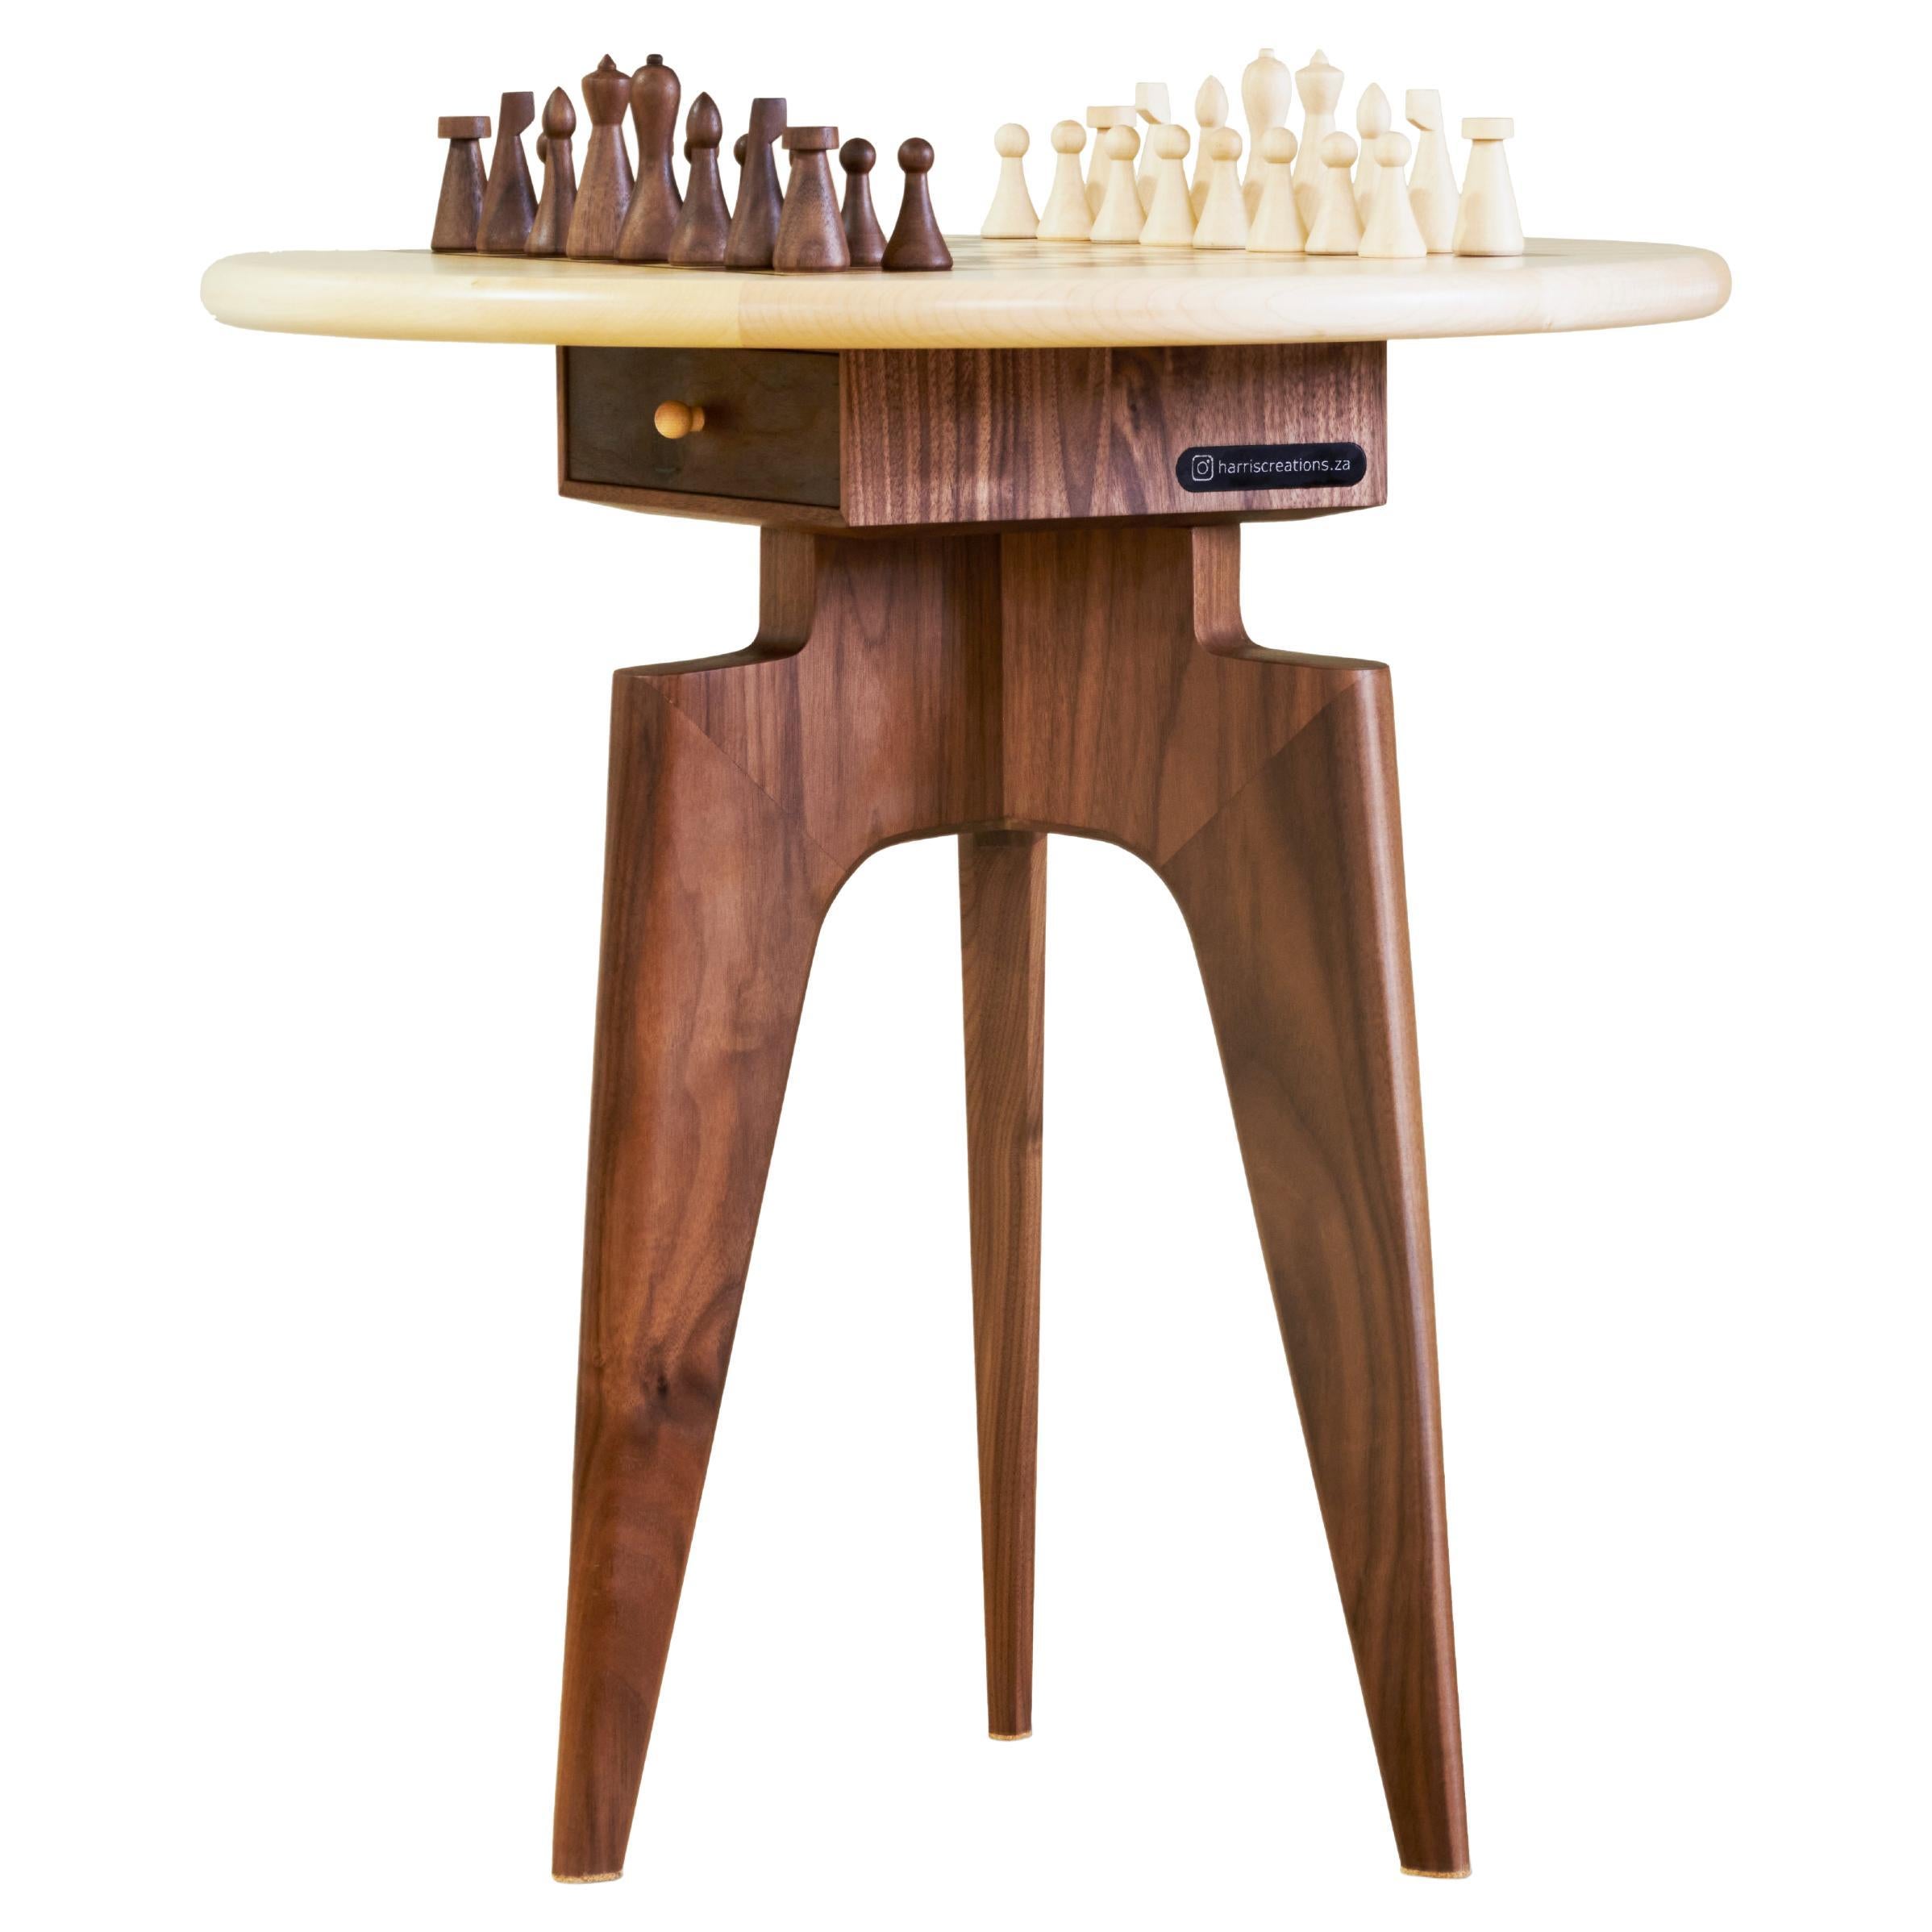 Wood Porn - A Wildly Classy Chess Set (Walnut and Sycamore) For Sale